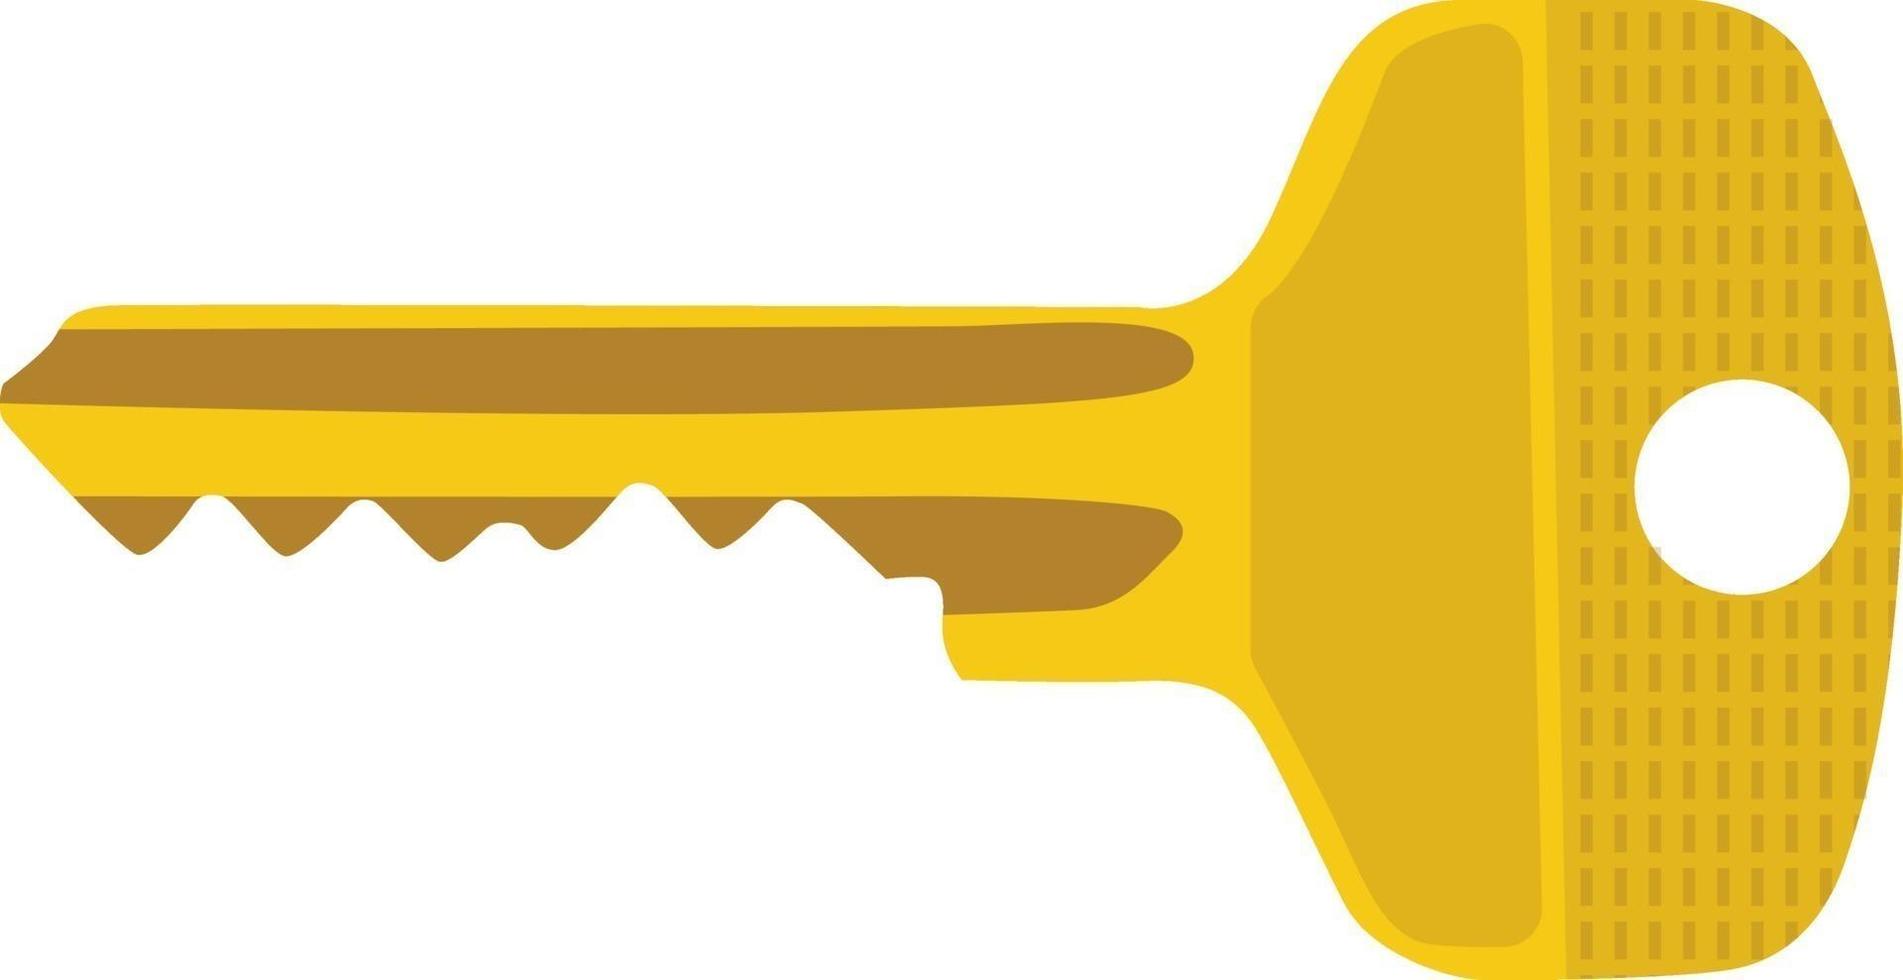 Key yellow, illustration, vector on a white background.